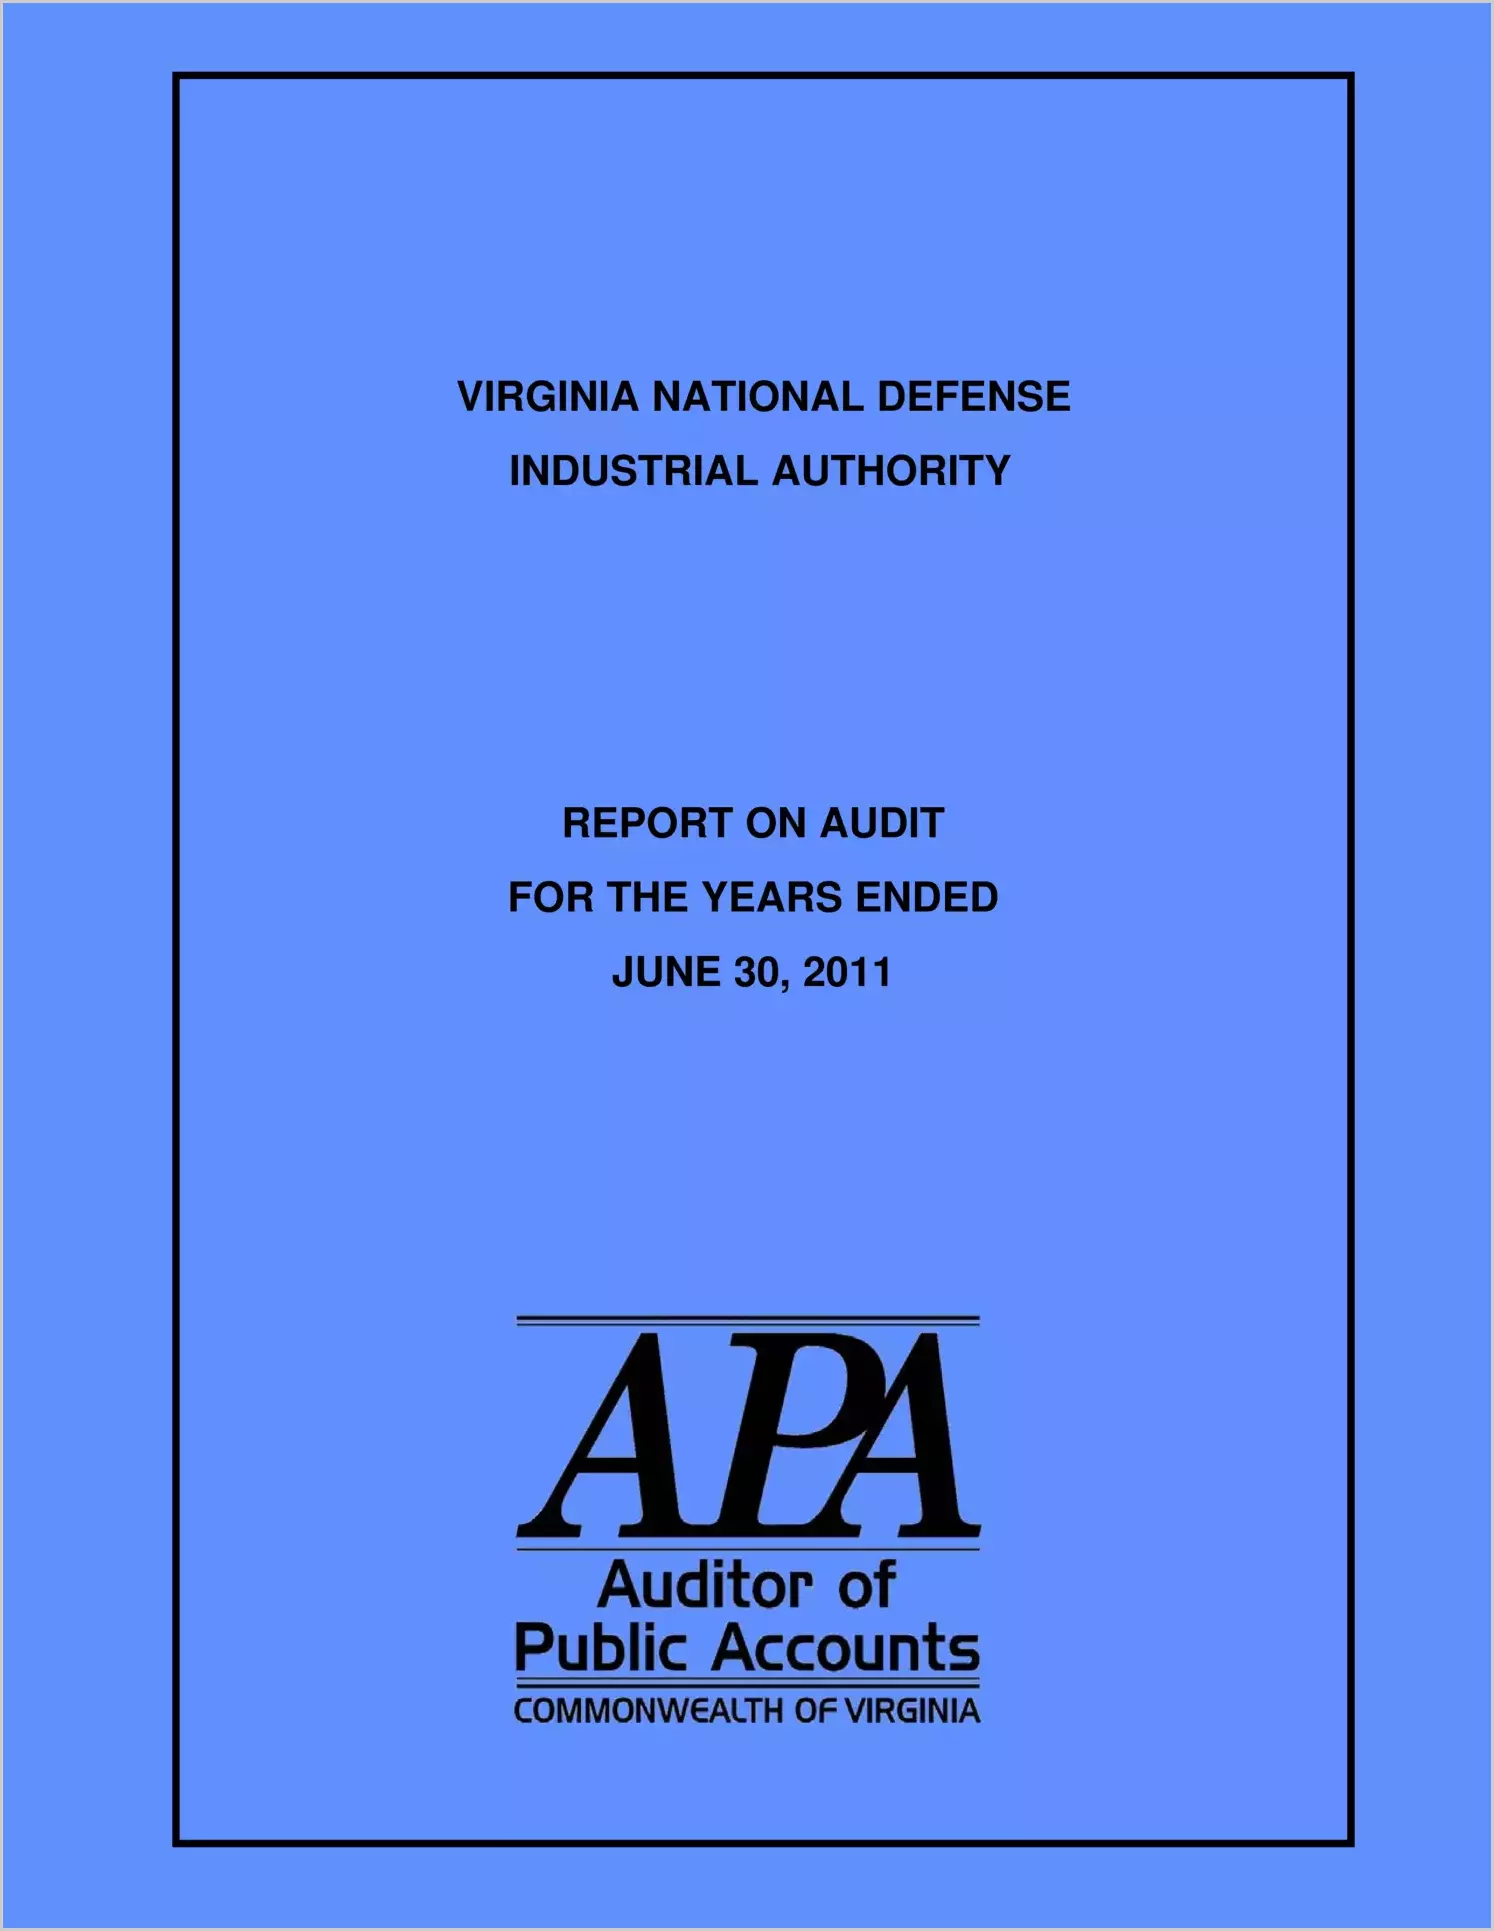 Virginia National Defense Industrial Authority Report on Audit for the year ended June 30, 2011